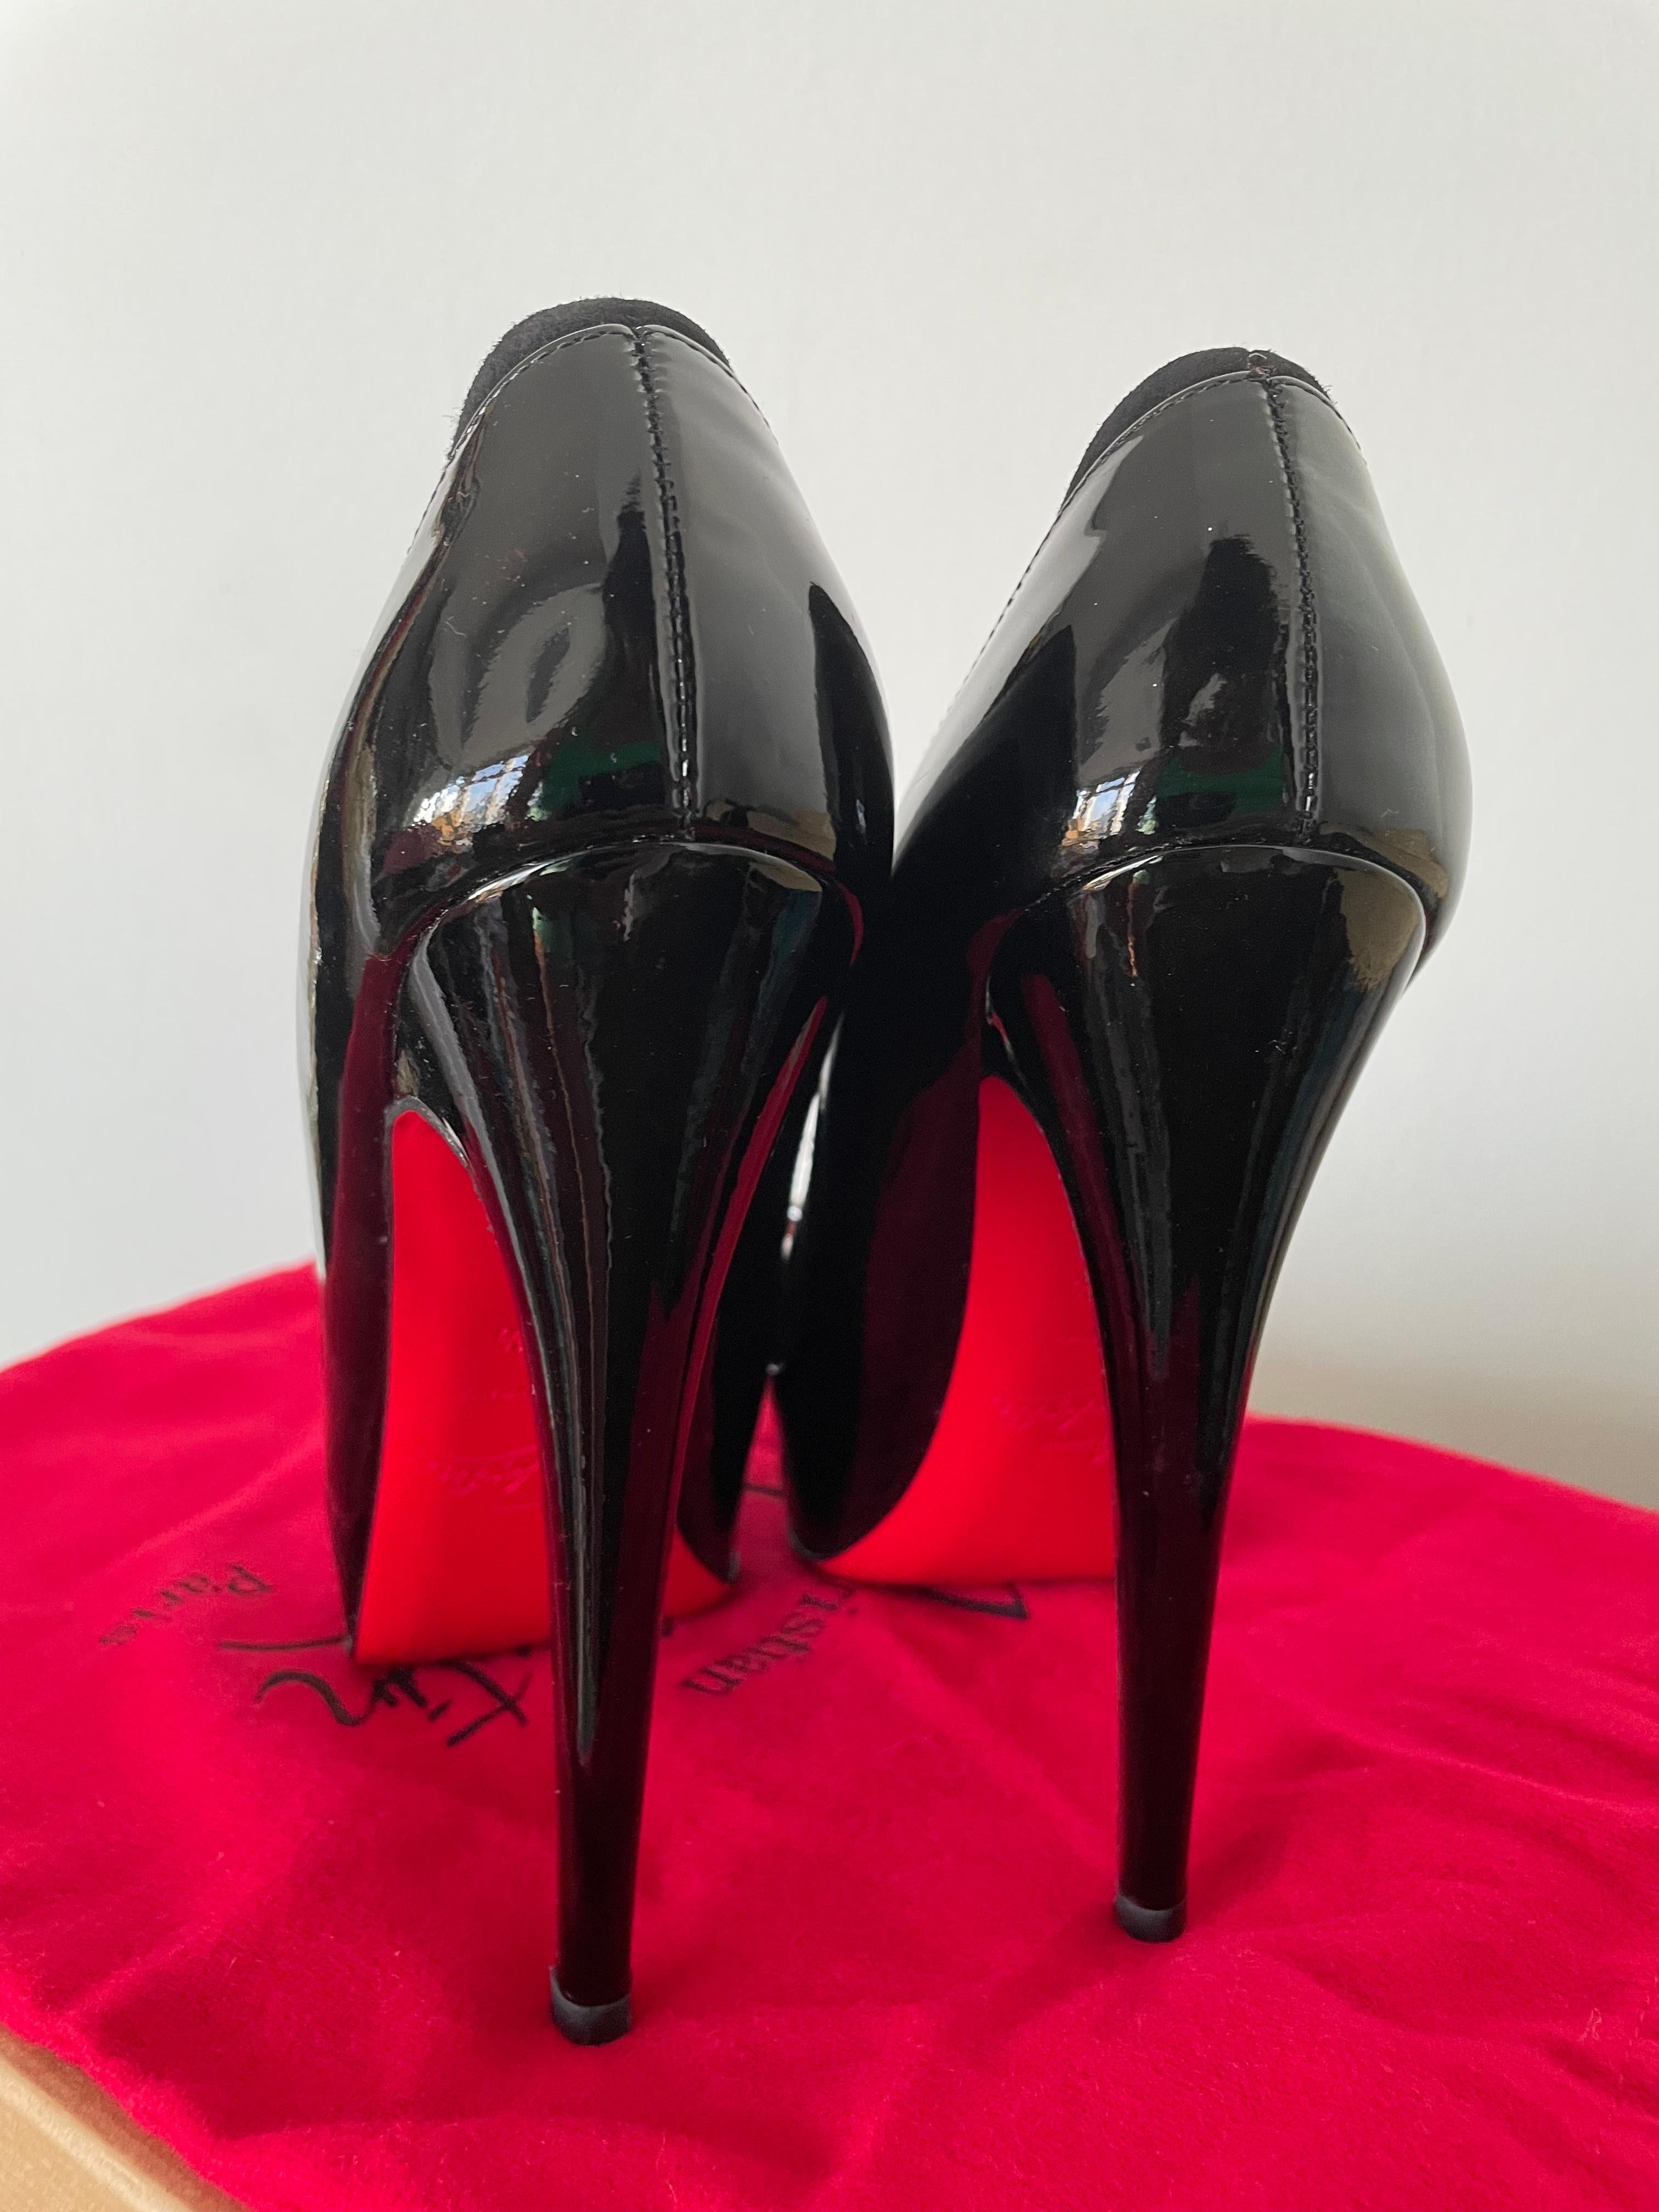 Christian Louboutin Asteroid 160 Black Patent with spike toe  size 35.5 In Excellent Condition For Sale In Toronto, CA